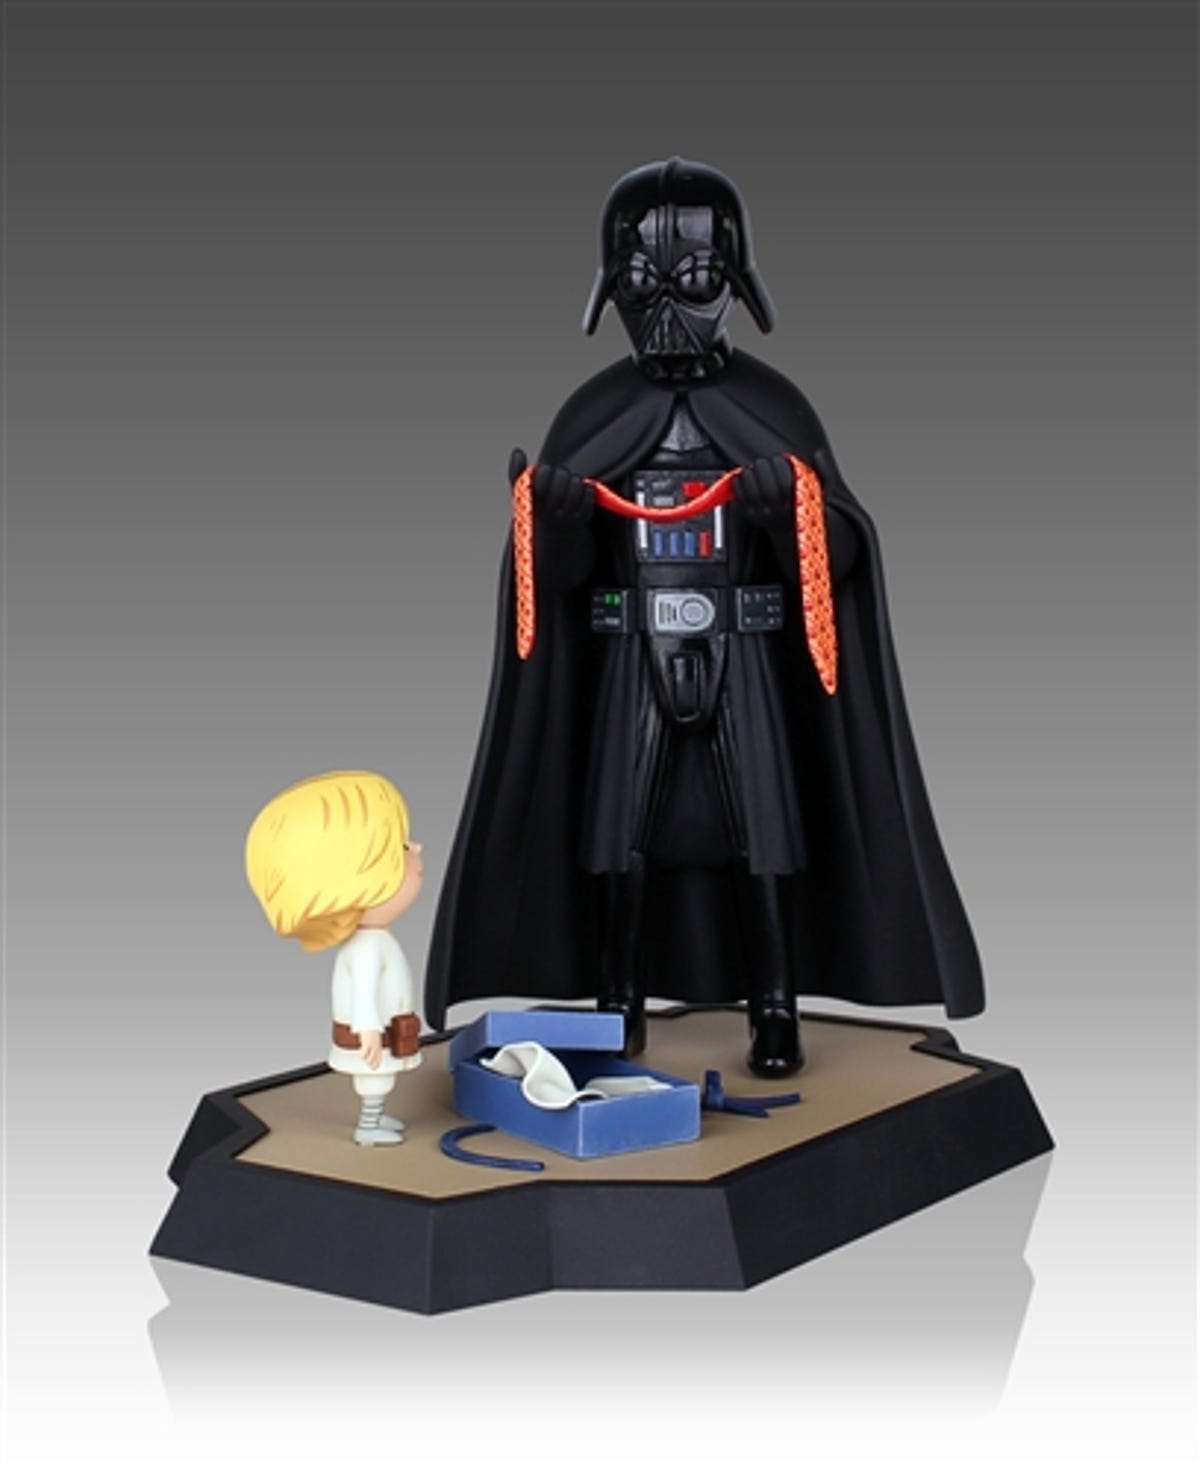 In Jeffrey Brown's bestselling kids book "Darth Vader and Son" we see the softer side of Luke and his dad. Now this touching tie scene can be sitting on your bookshelf as a limited-edition maquette from Gentle Giant Studios.